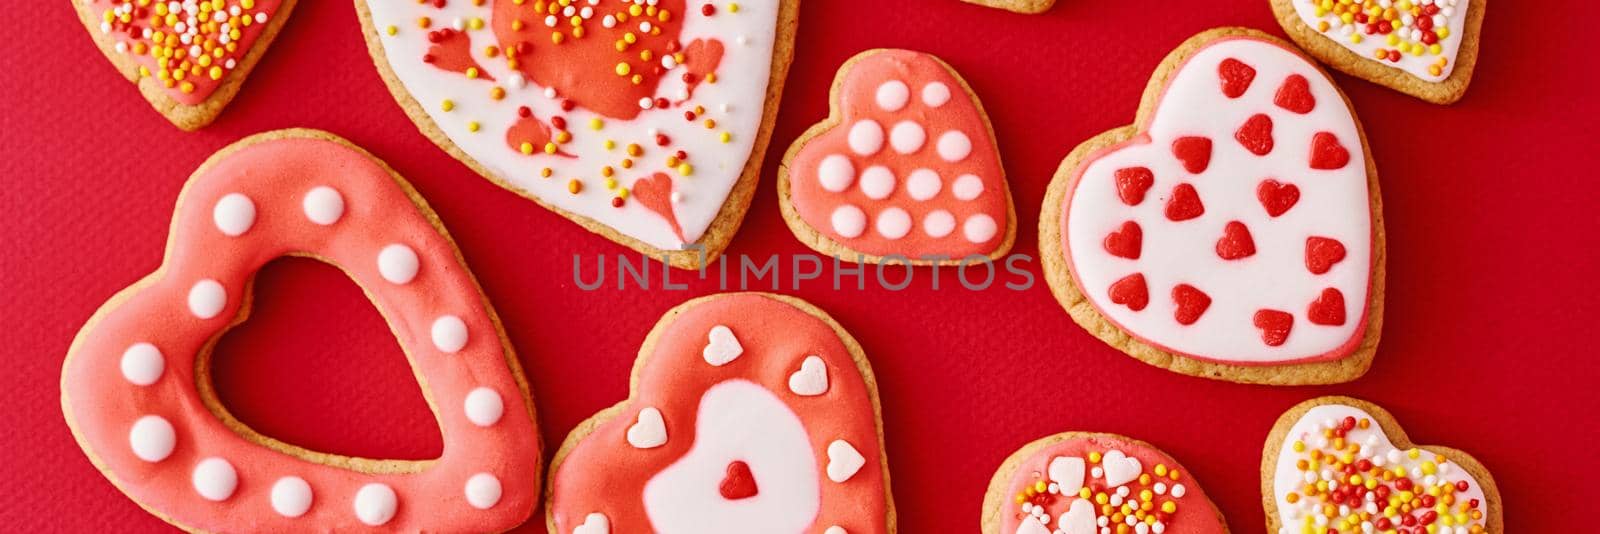 Background of decorated with icing and glazed heart shape cookies on the red background, long banner. Valentines Day food concept by Lazy_Bear